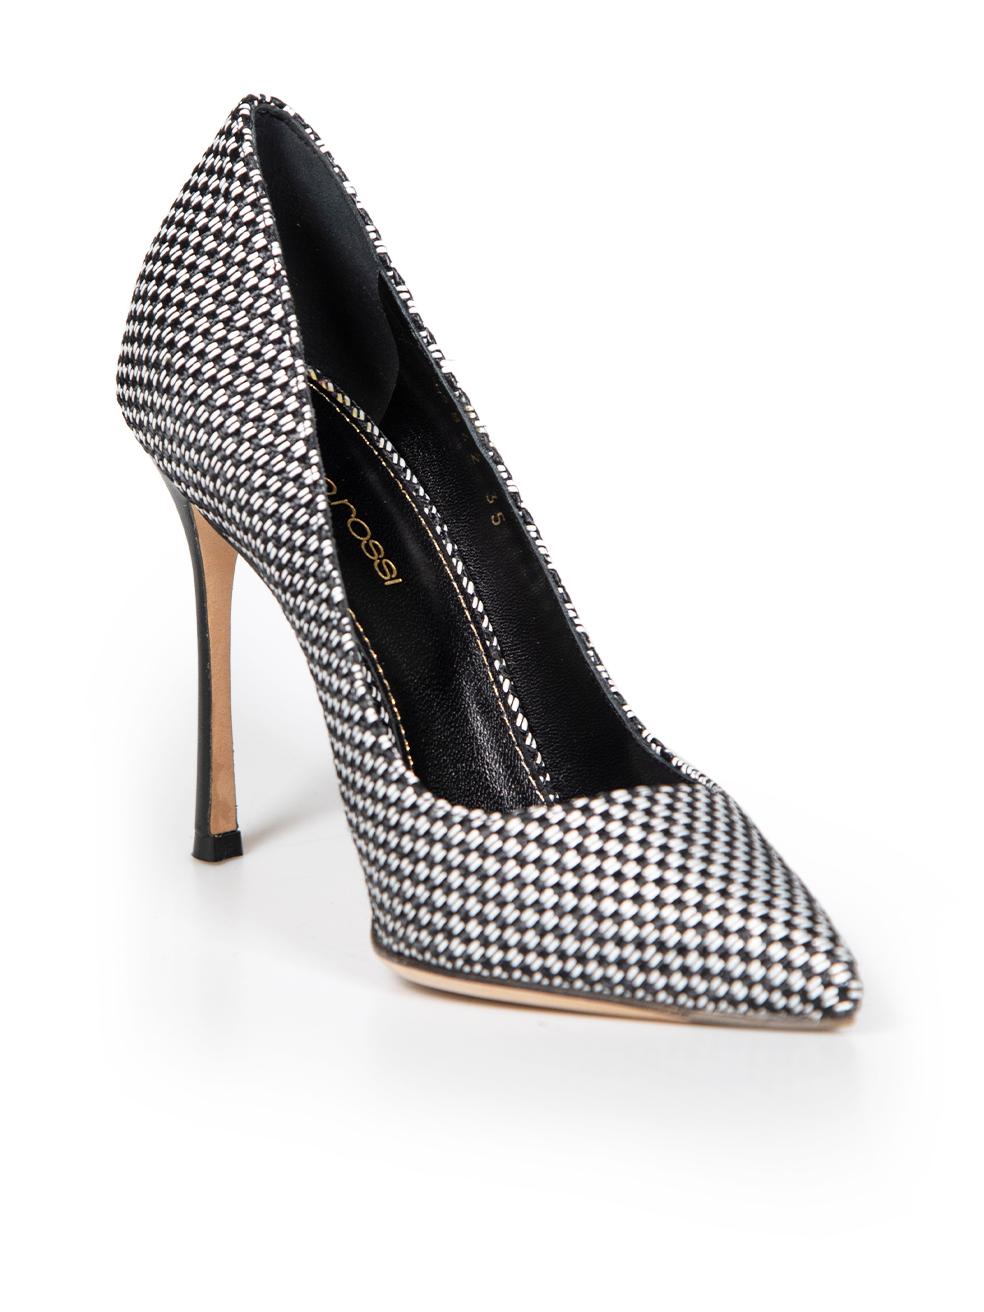 CONDITION is Never worn. No visible wear to heels is evident on this new Sergio Rossi designer resale item.
 
 
 
 Details
 
 
 Black
 
 Cloth textile
 
 Slip on pumps
 
 Weave gingham accent
 
 Pointed toe
 
 High heel
 
 
 
 
 
 Made in Italy
 
 
